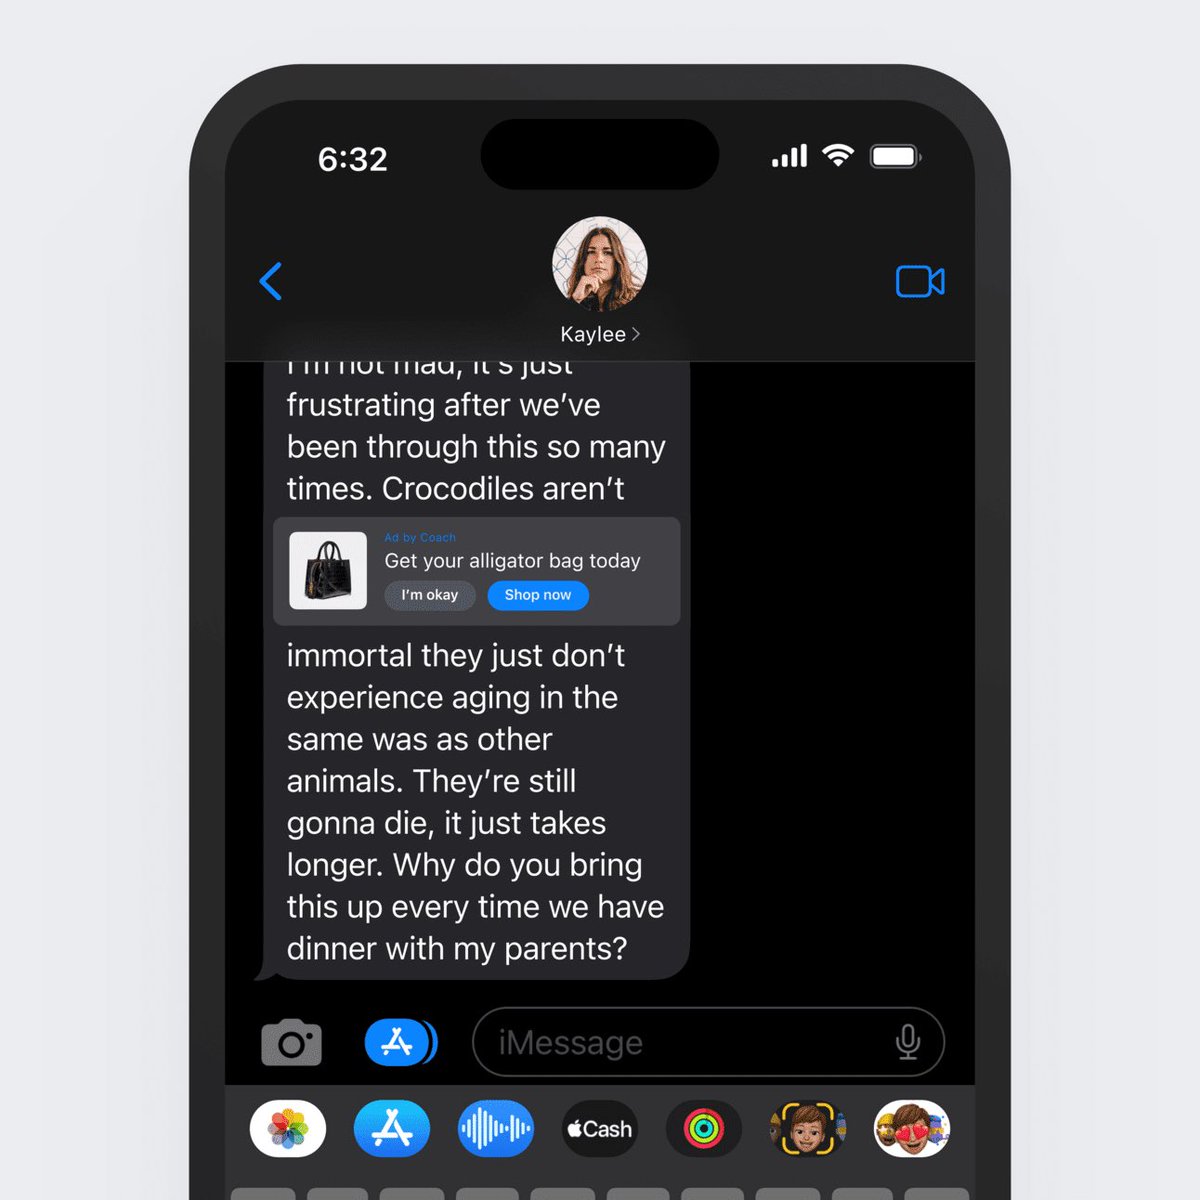 iMessage banner ads inside the message that dynamically update based on message content